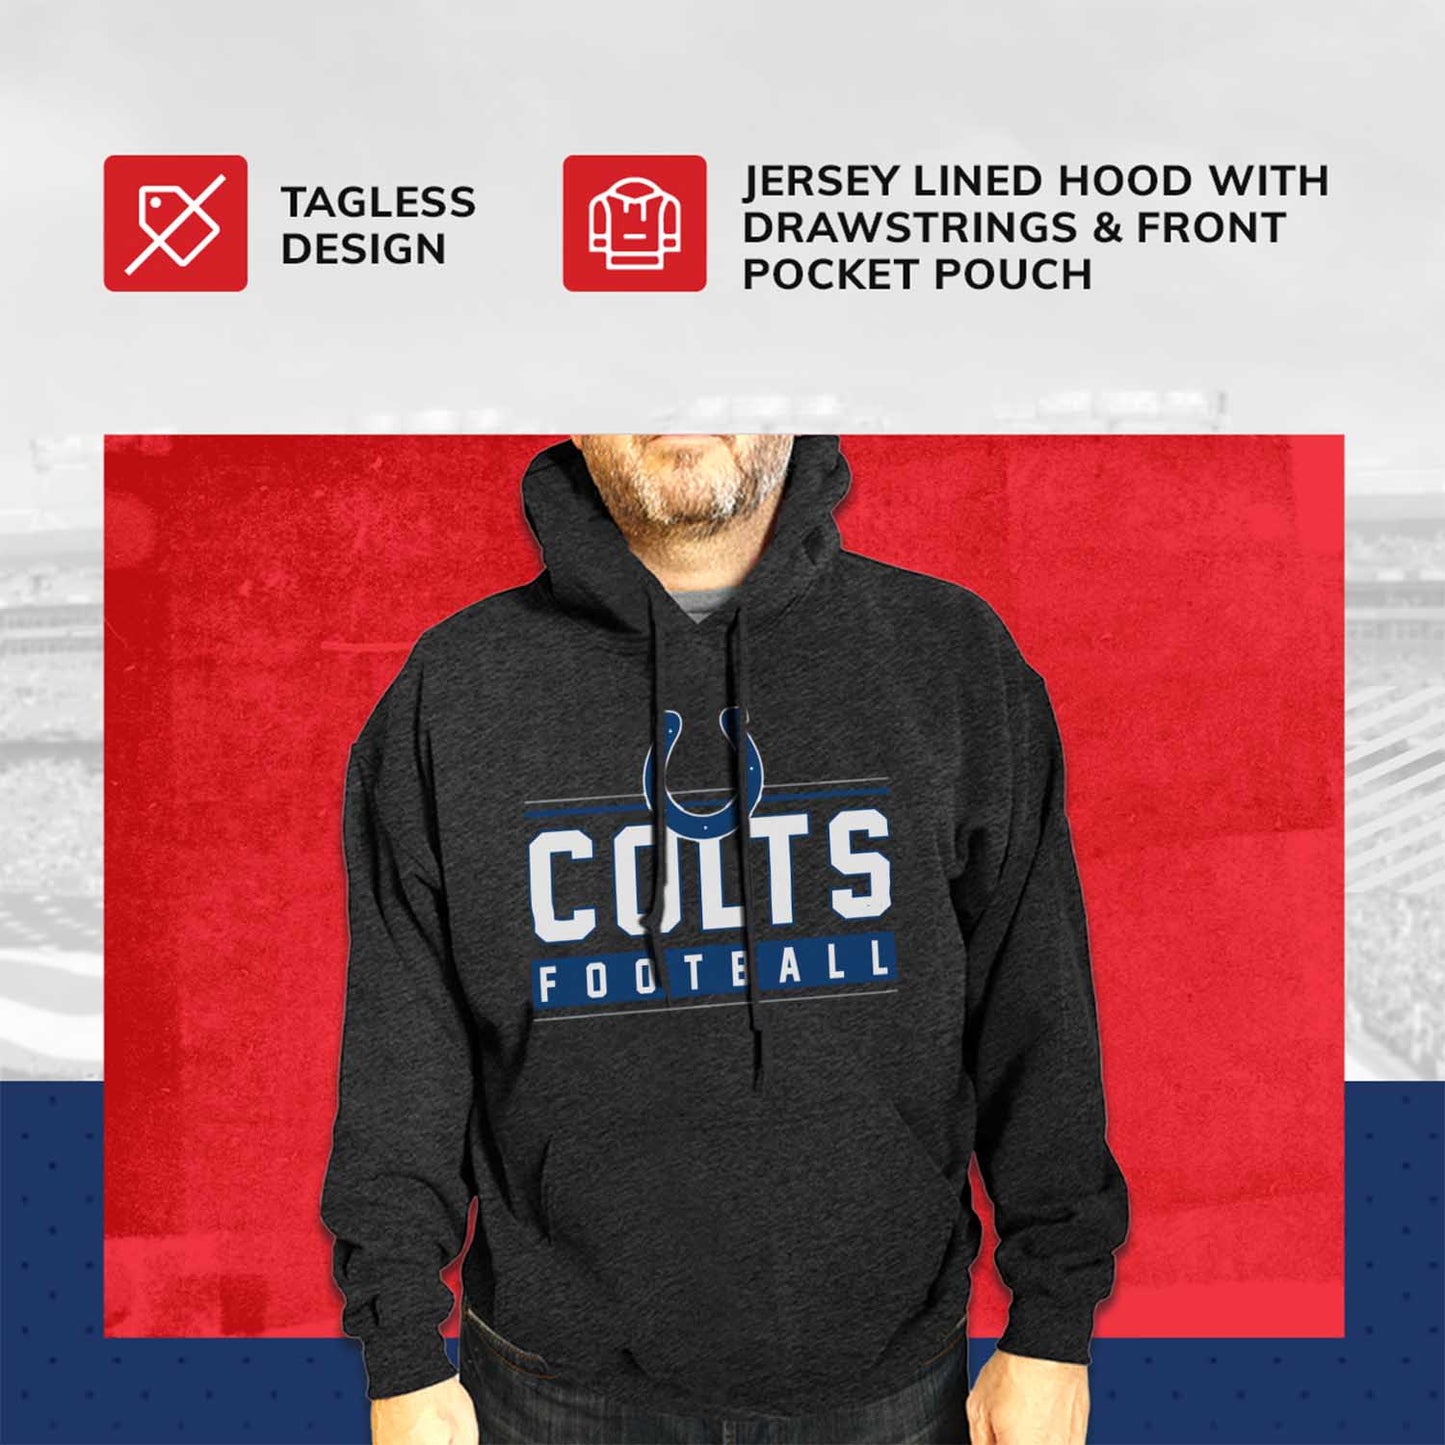 Indianapolis Colts NFL Adult True Fan Hooded Charcoal Sweatshirt - Charcoal